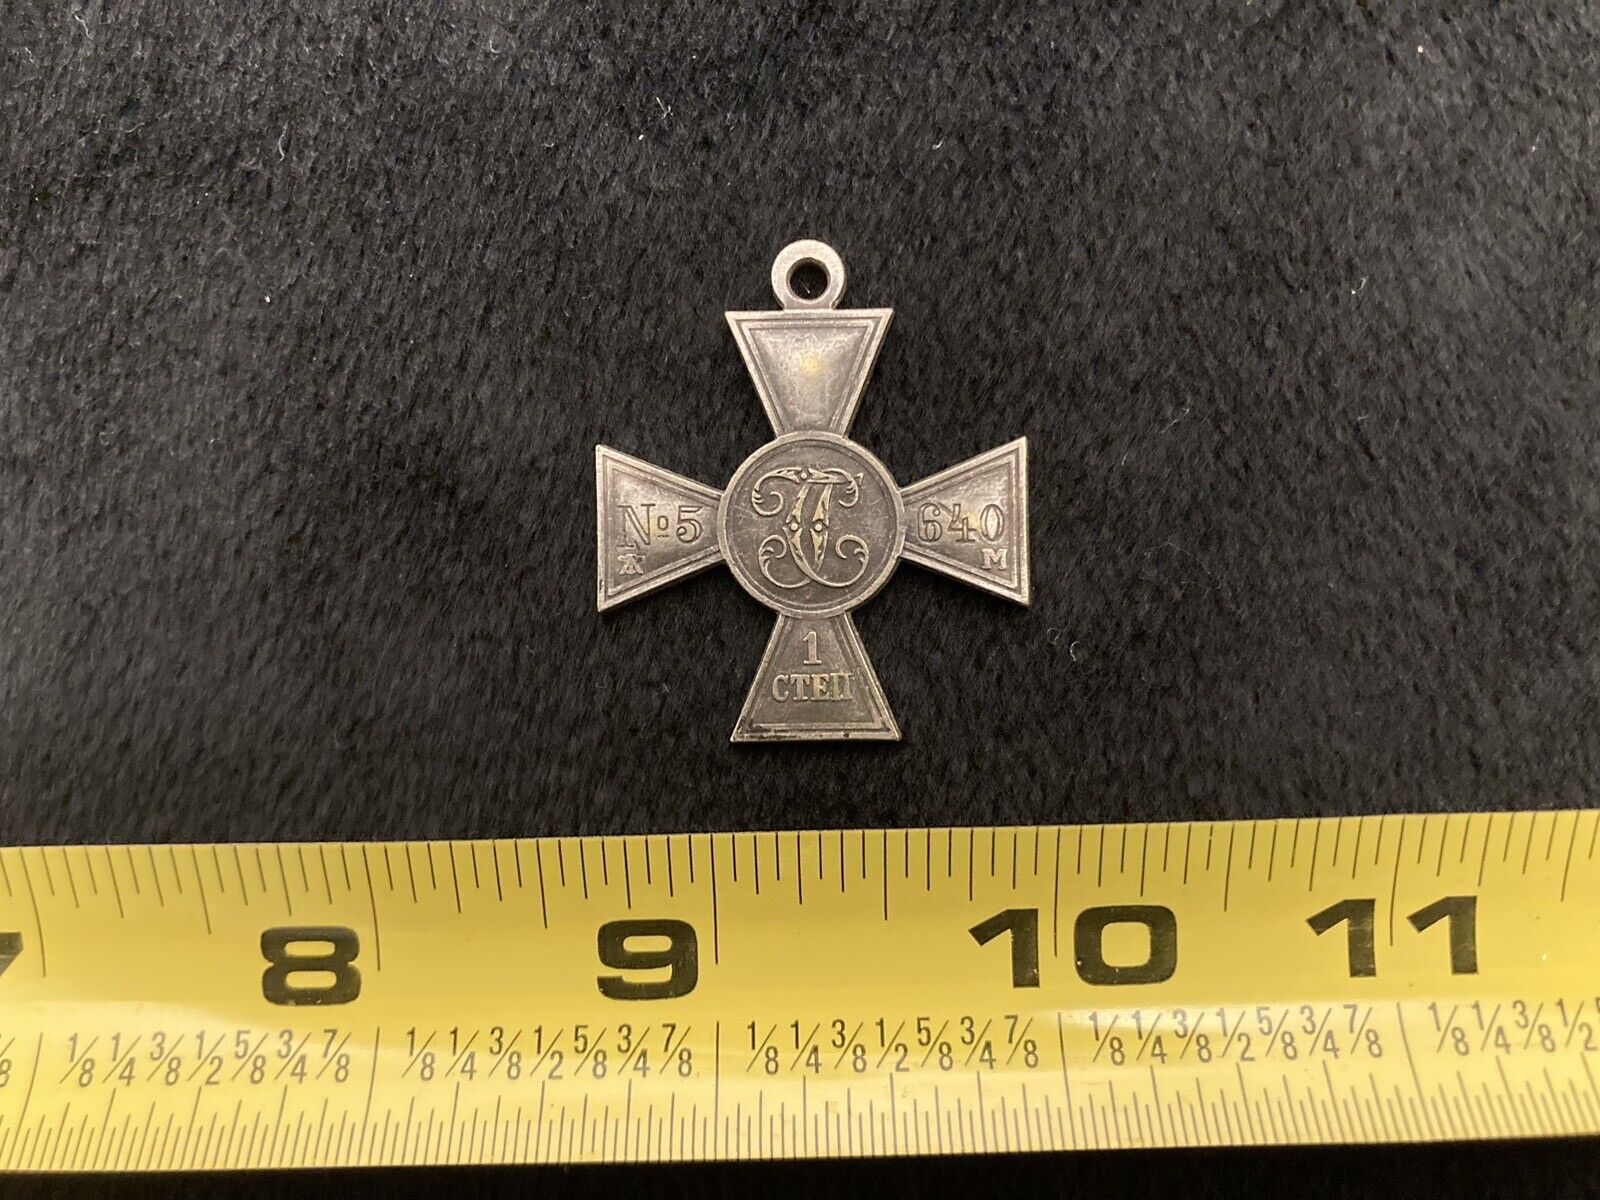 Vtg Imperial Russia St. George Cross Medal Unknown if Original or Replica Read